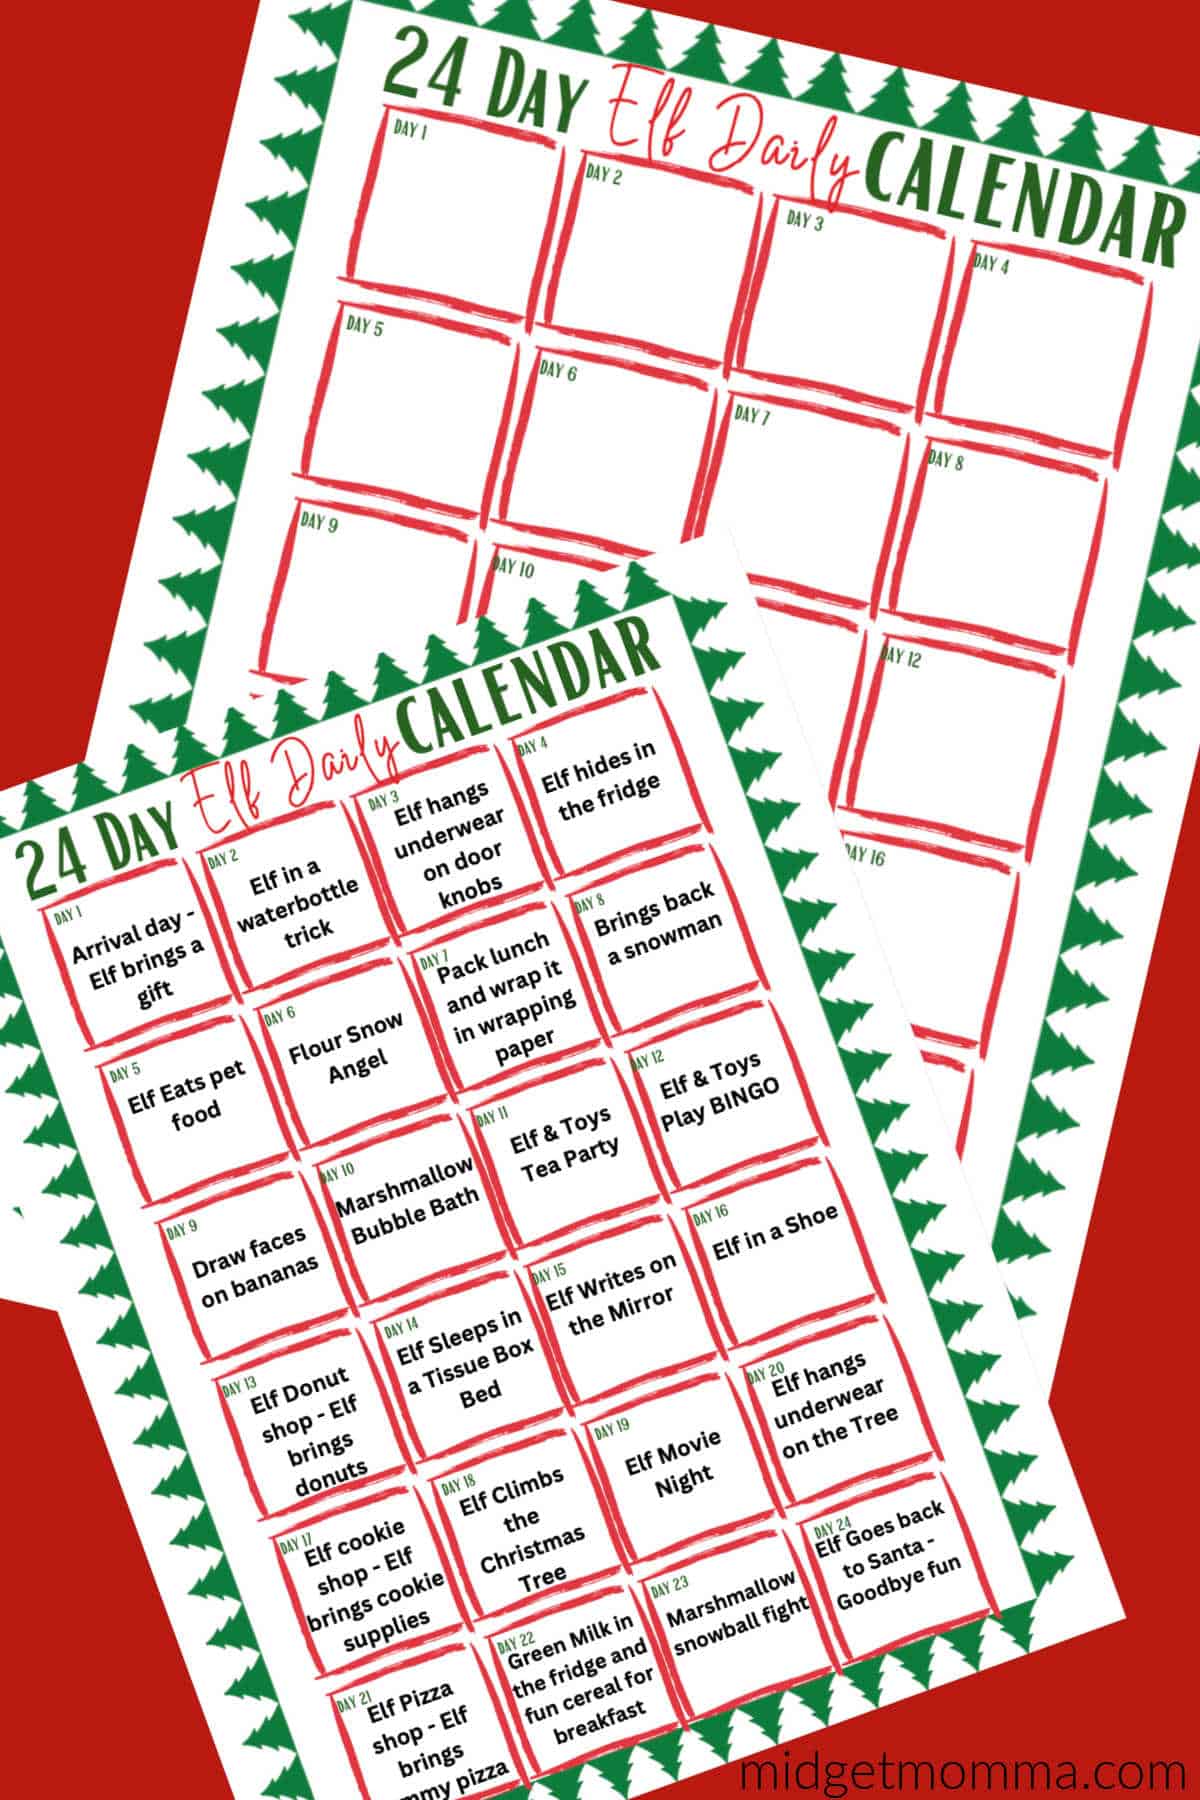 24 days of elf on the shelf ideas calendar printable pages